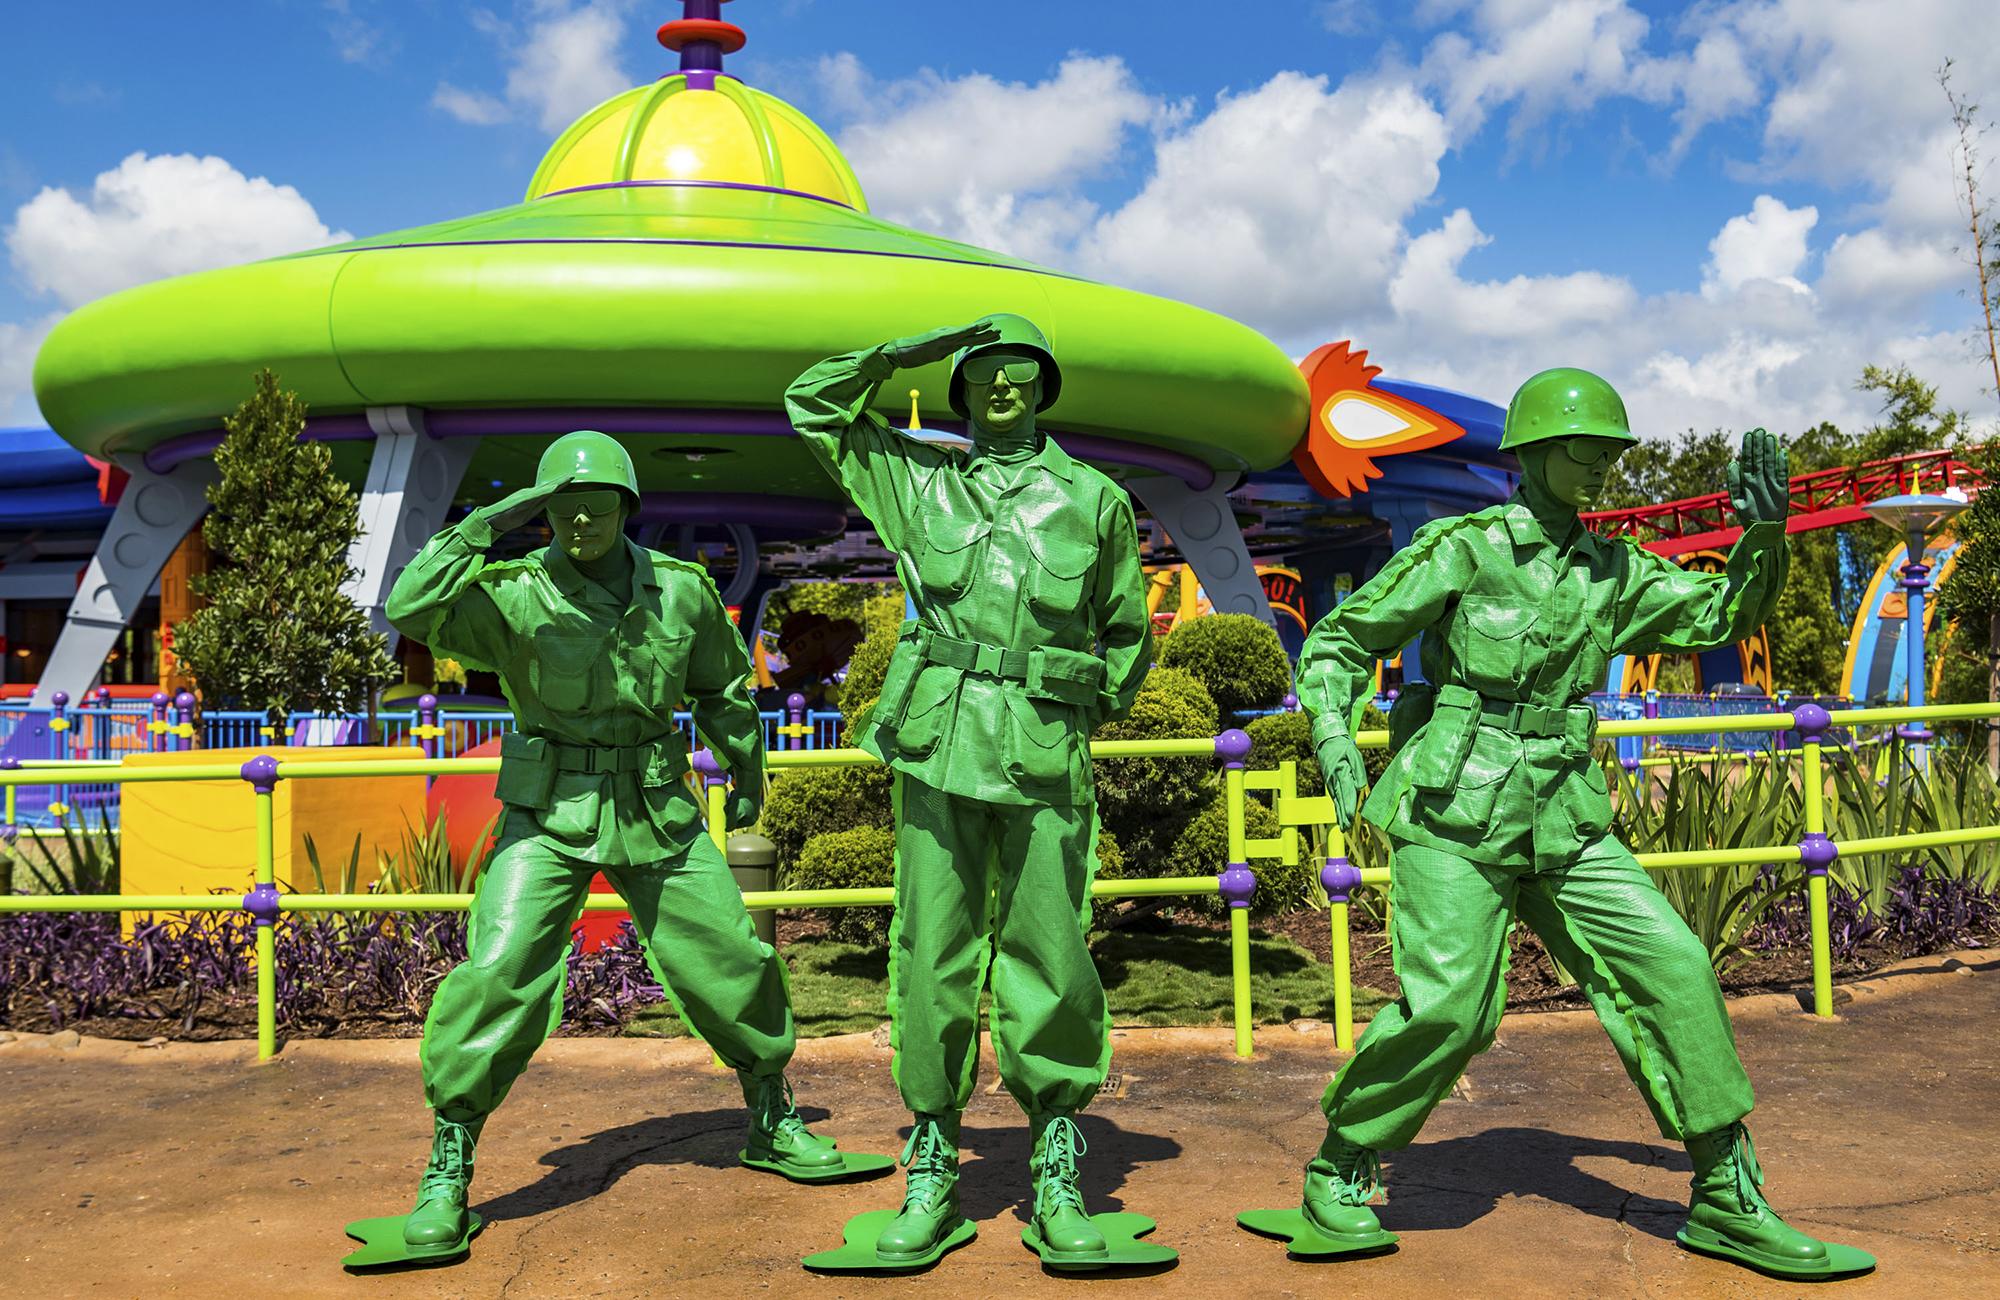 The 10 Coolest Things in Disney's Toy Story Land – Fodors Travel Guide